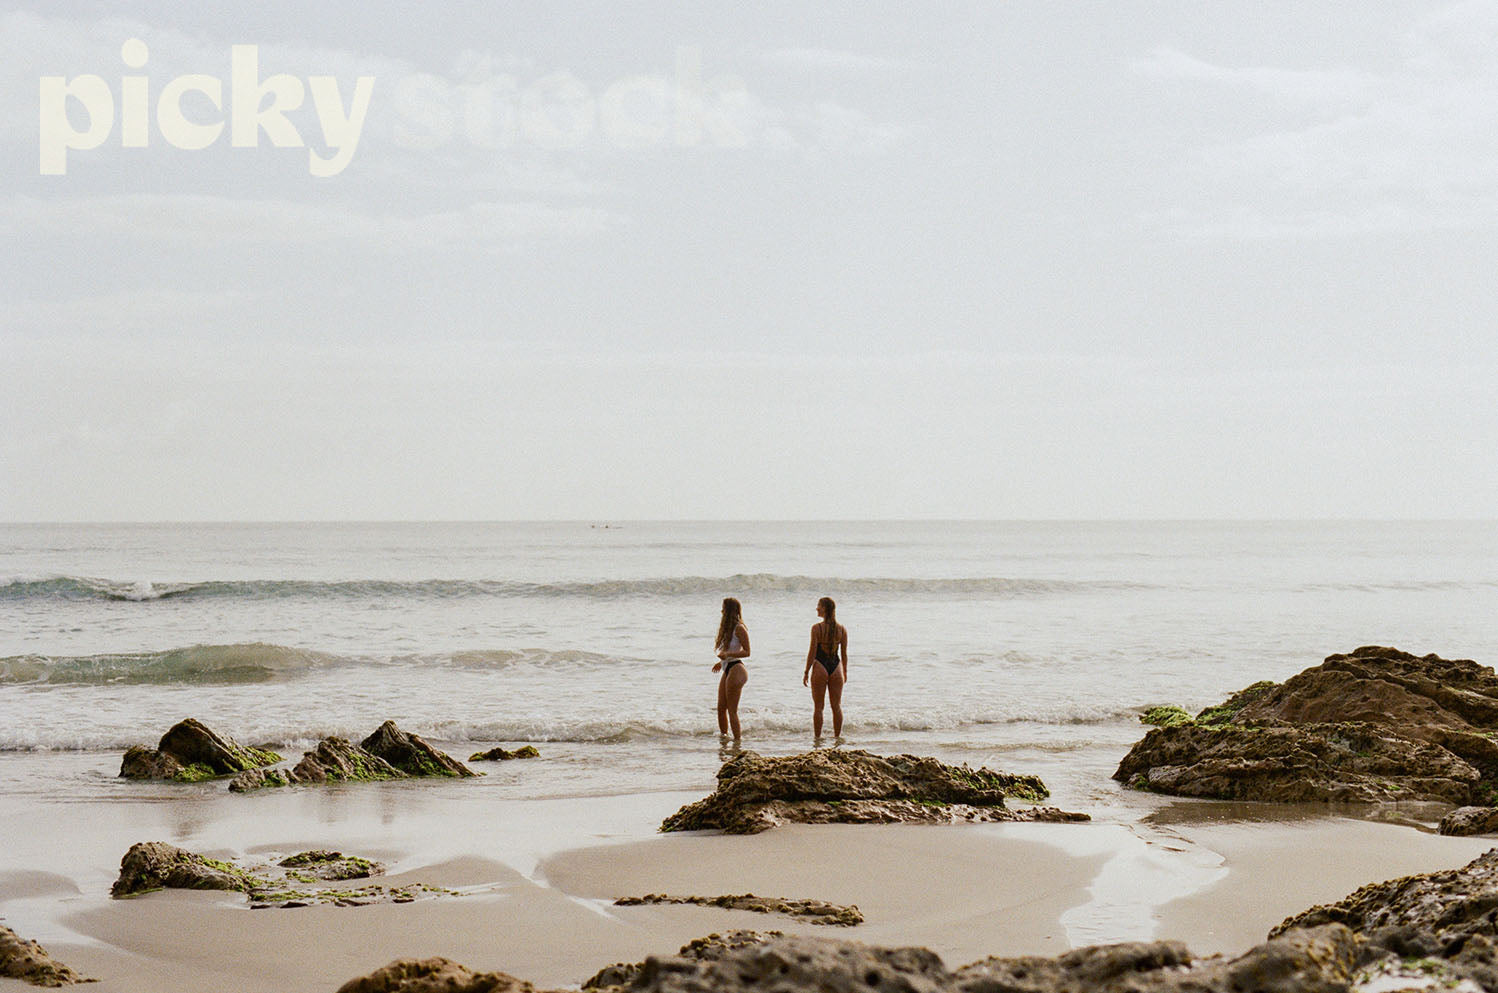 Two girls standing in swim suits looking out to the ocean. Sea has a few waves, but relatively calm. Standing next to large rocks, at low tide. 